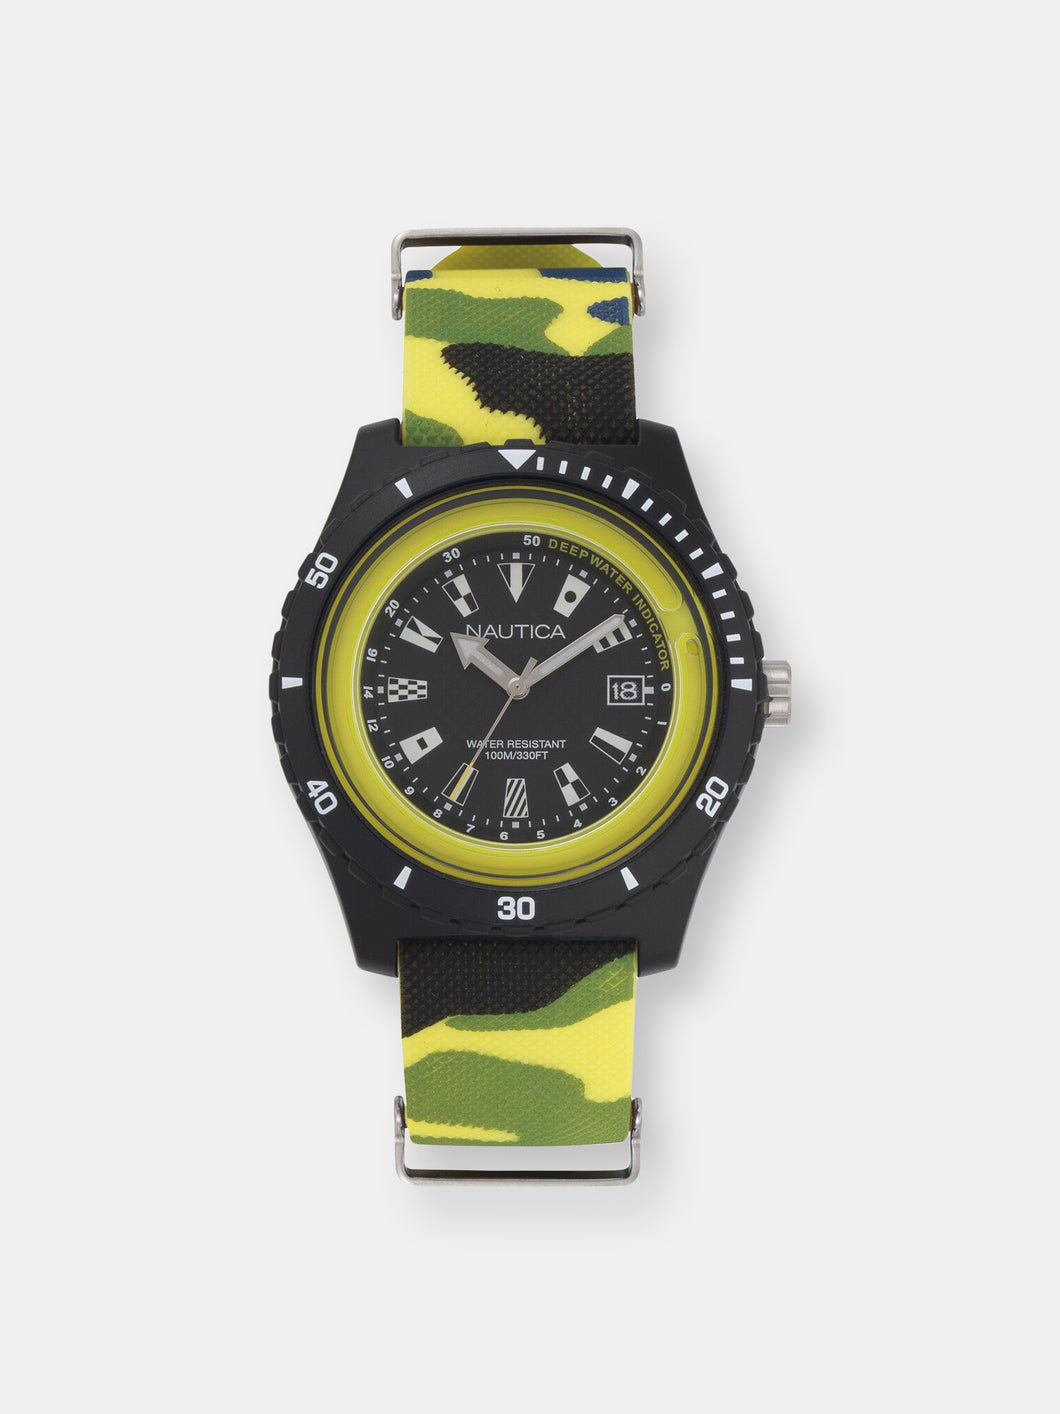 Nautica Watch NAPSRF007 Surfside, Analog, Water Resistant, Deep Water Indicator, Calendar, Signal Flag Indexes, Camo Silicone Strap, Black